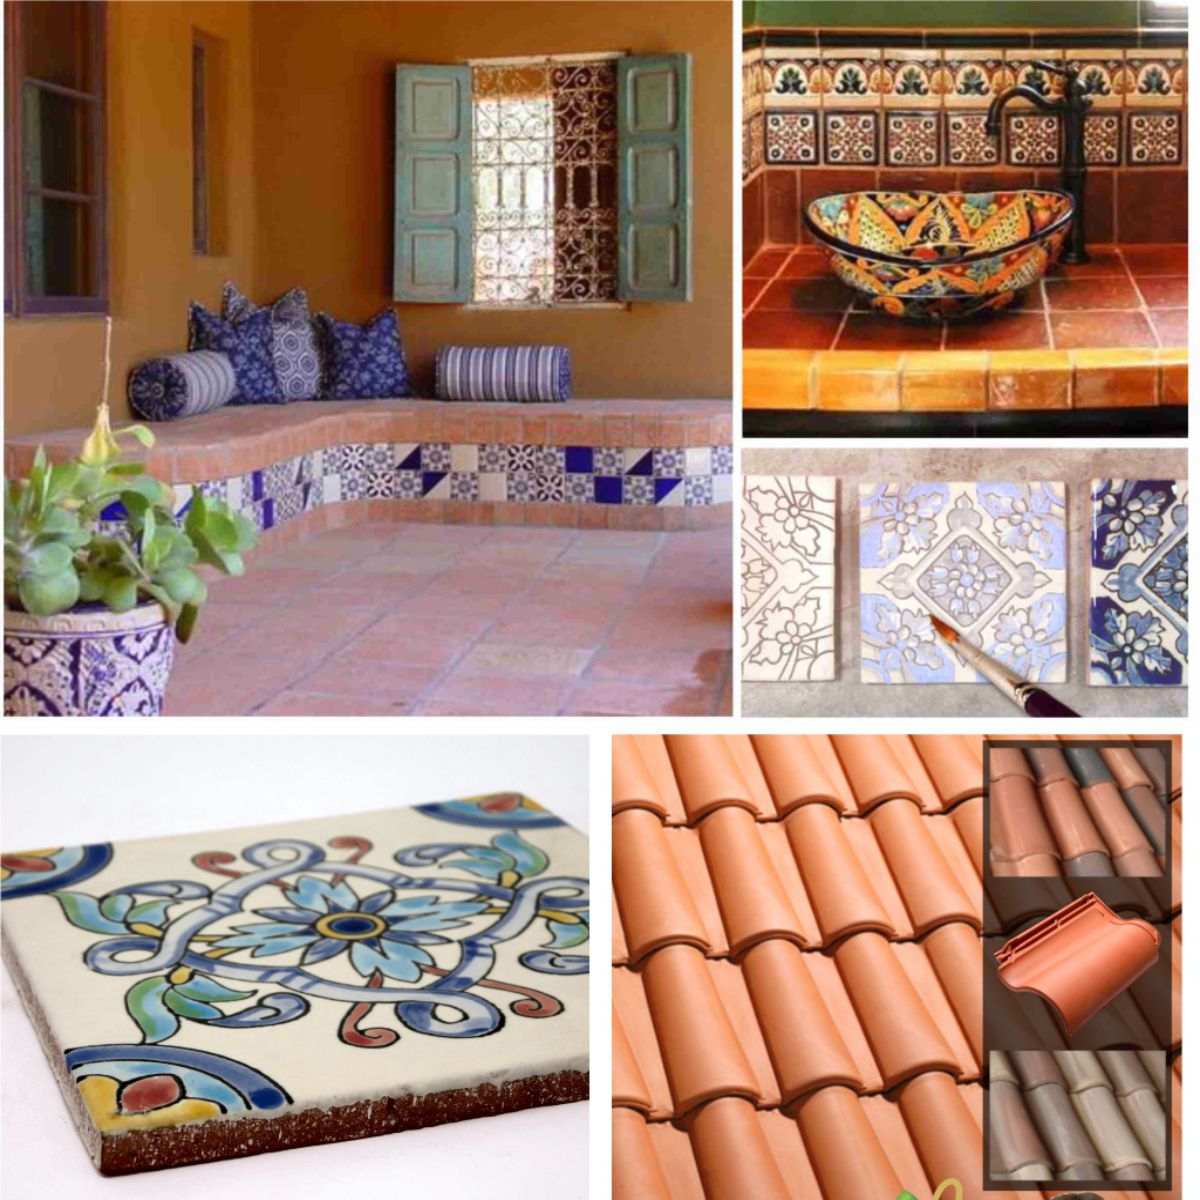 HANDCRAFTED TILE & CLAY ROOF TILES